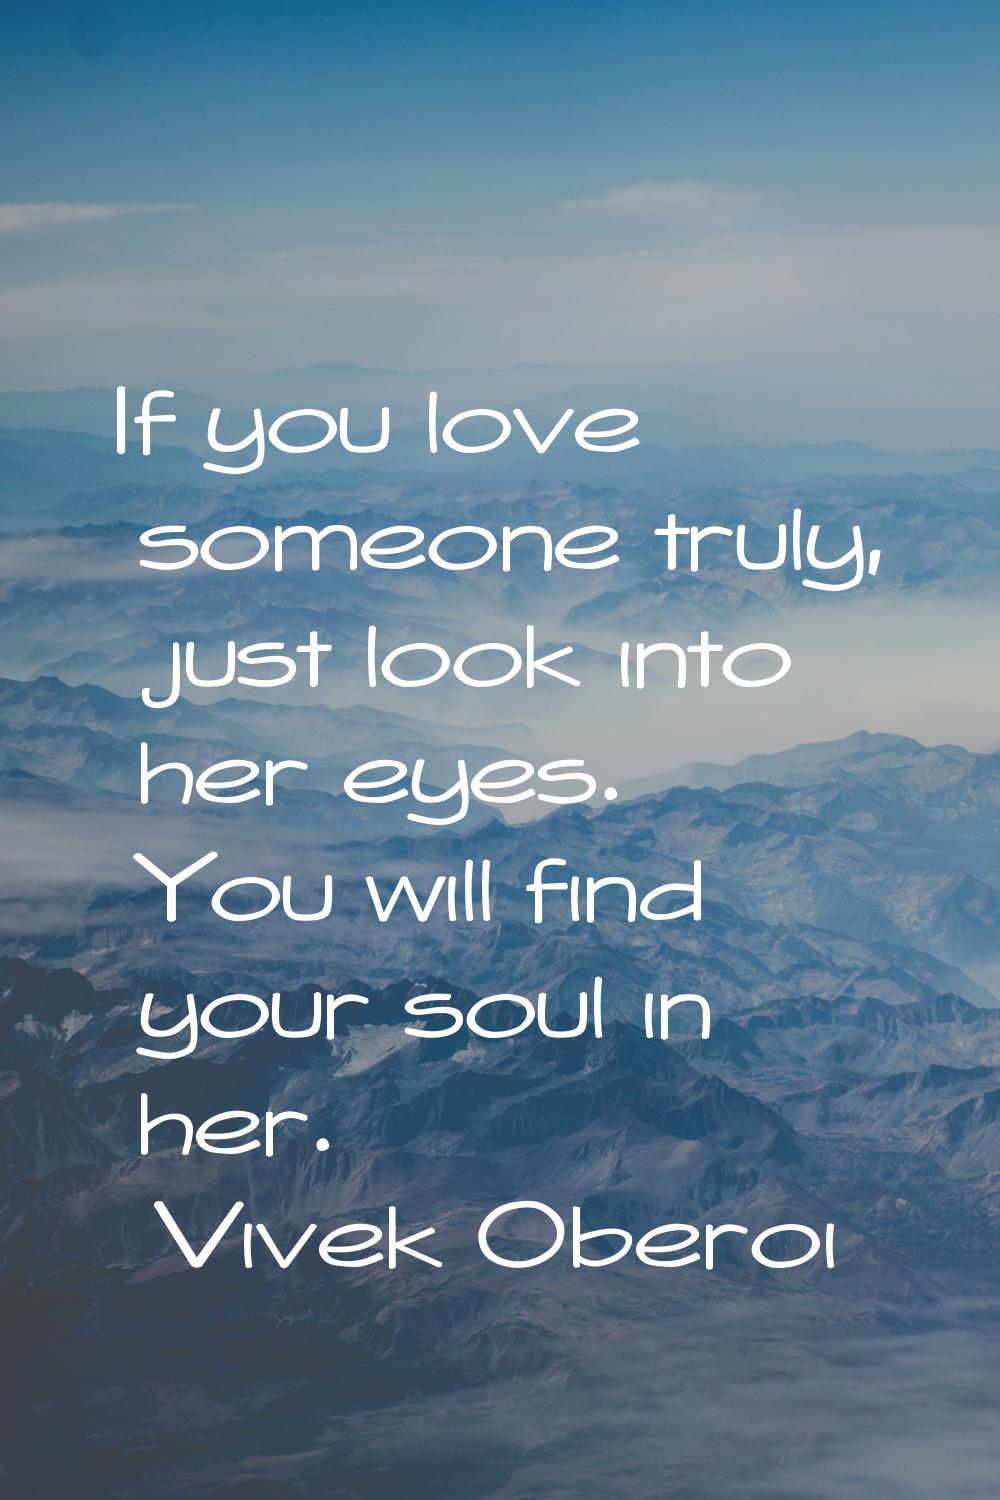 If you love someone truly, just look into her eyes. You will find your soul in her.